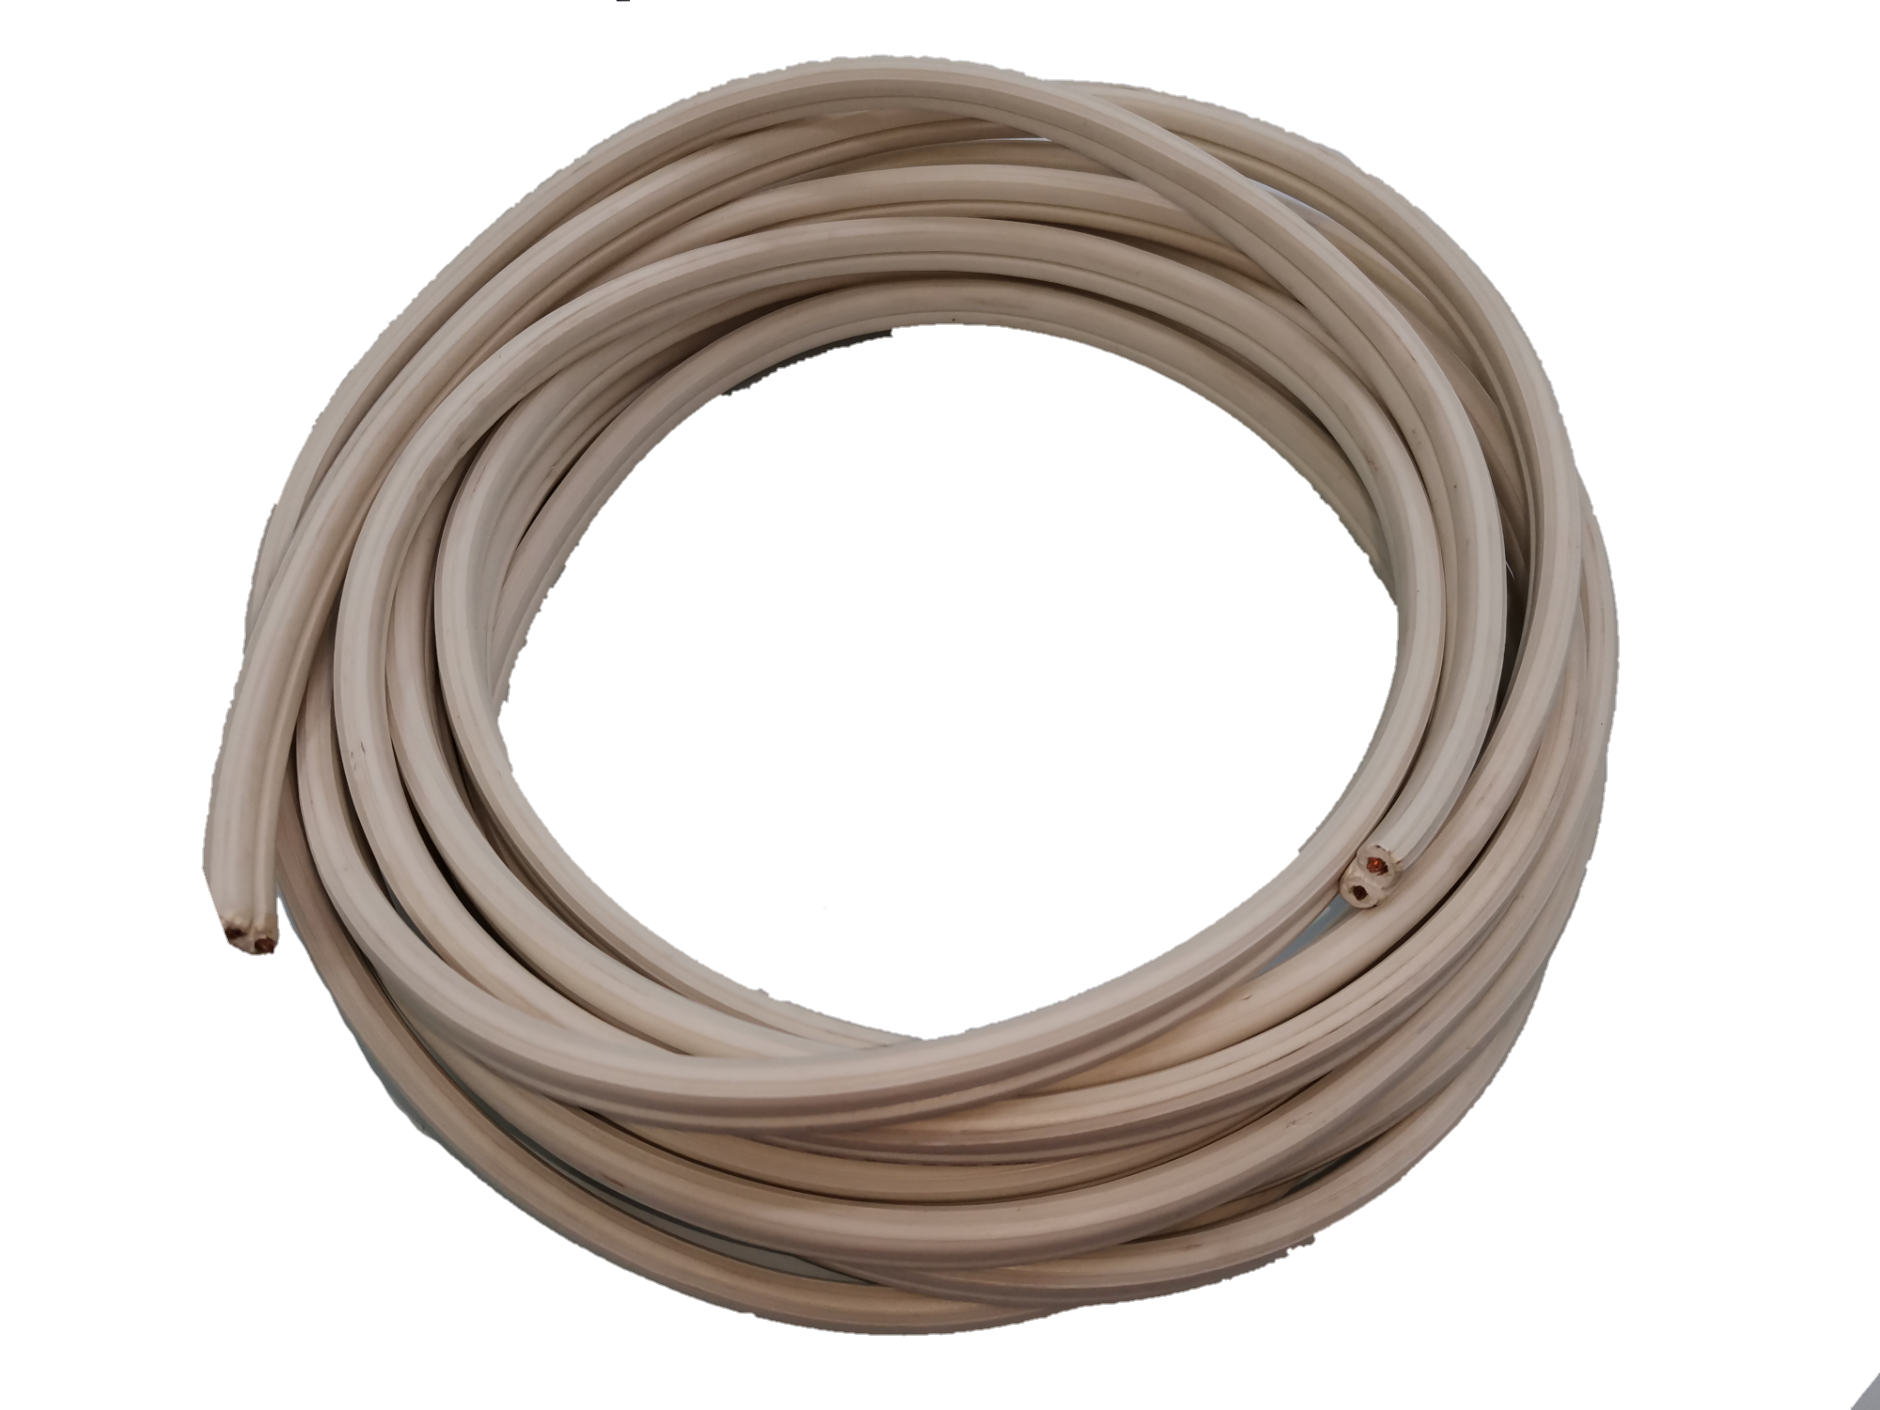 flat-cord-wire-3-5mm-2c-12-2-pre-cut-by-5meters-white-philflex